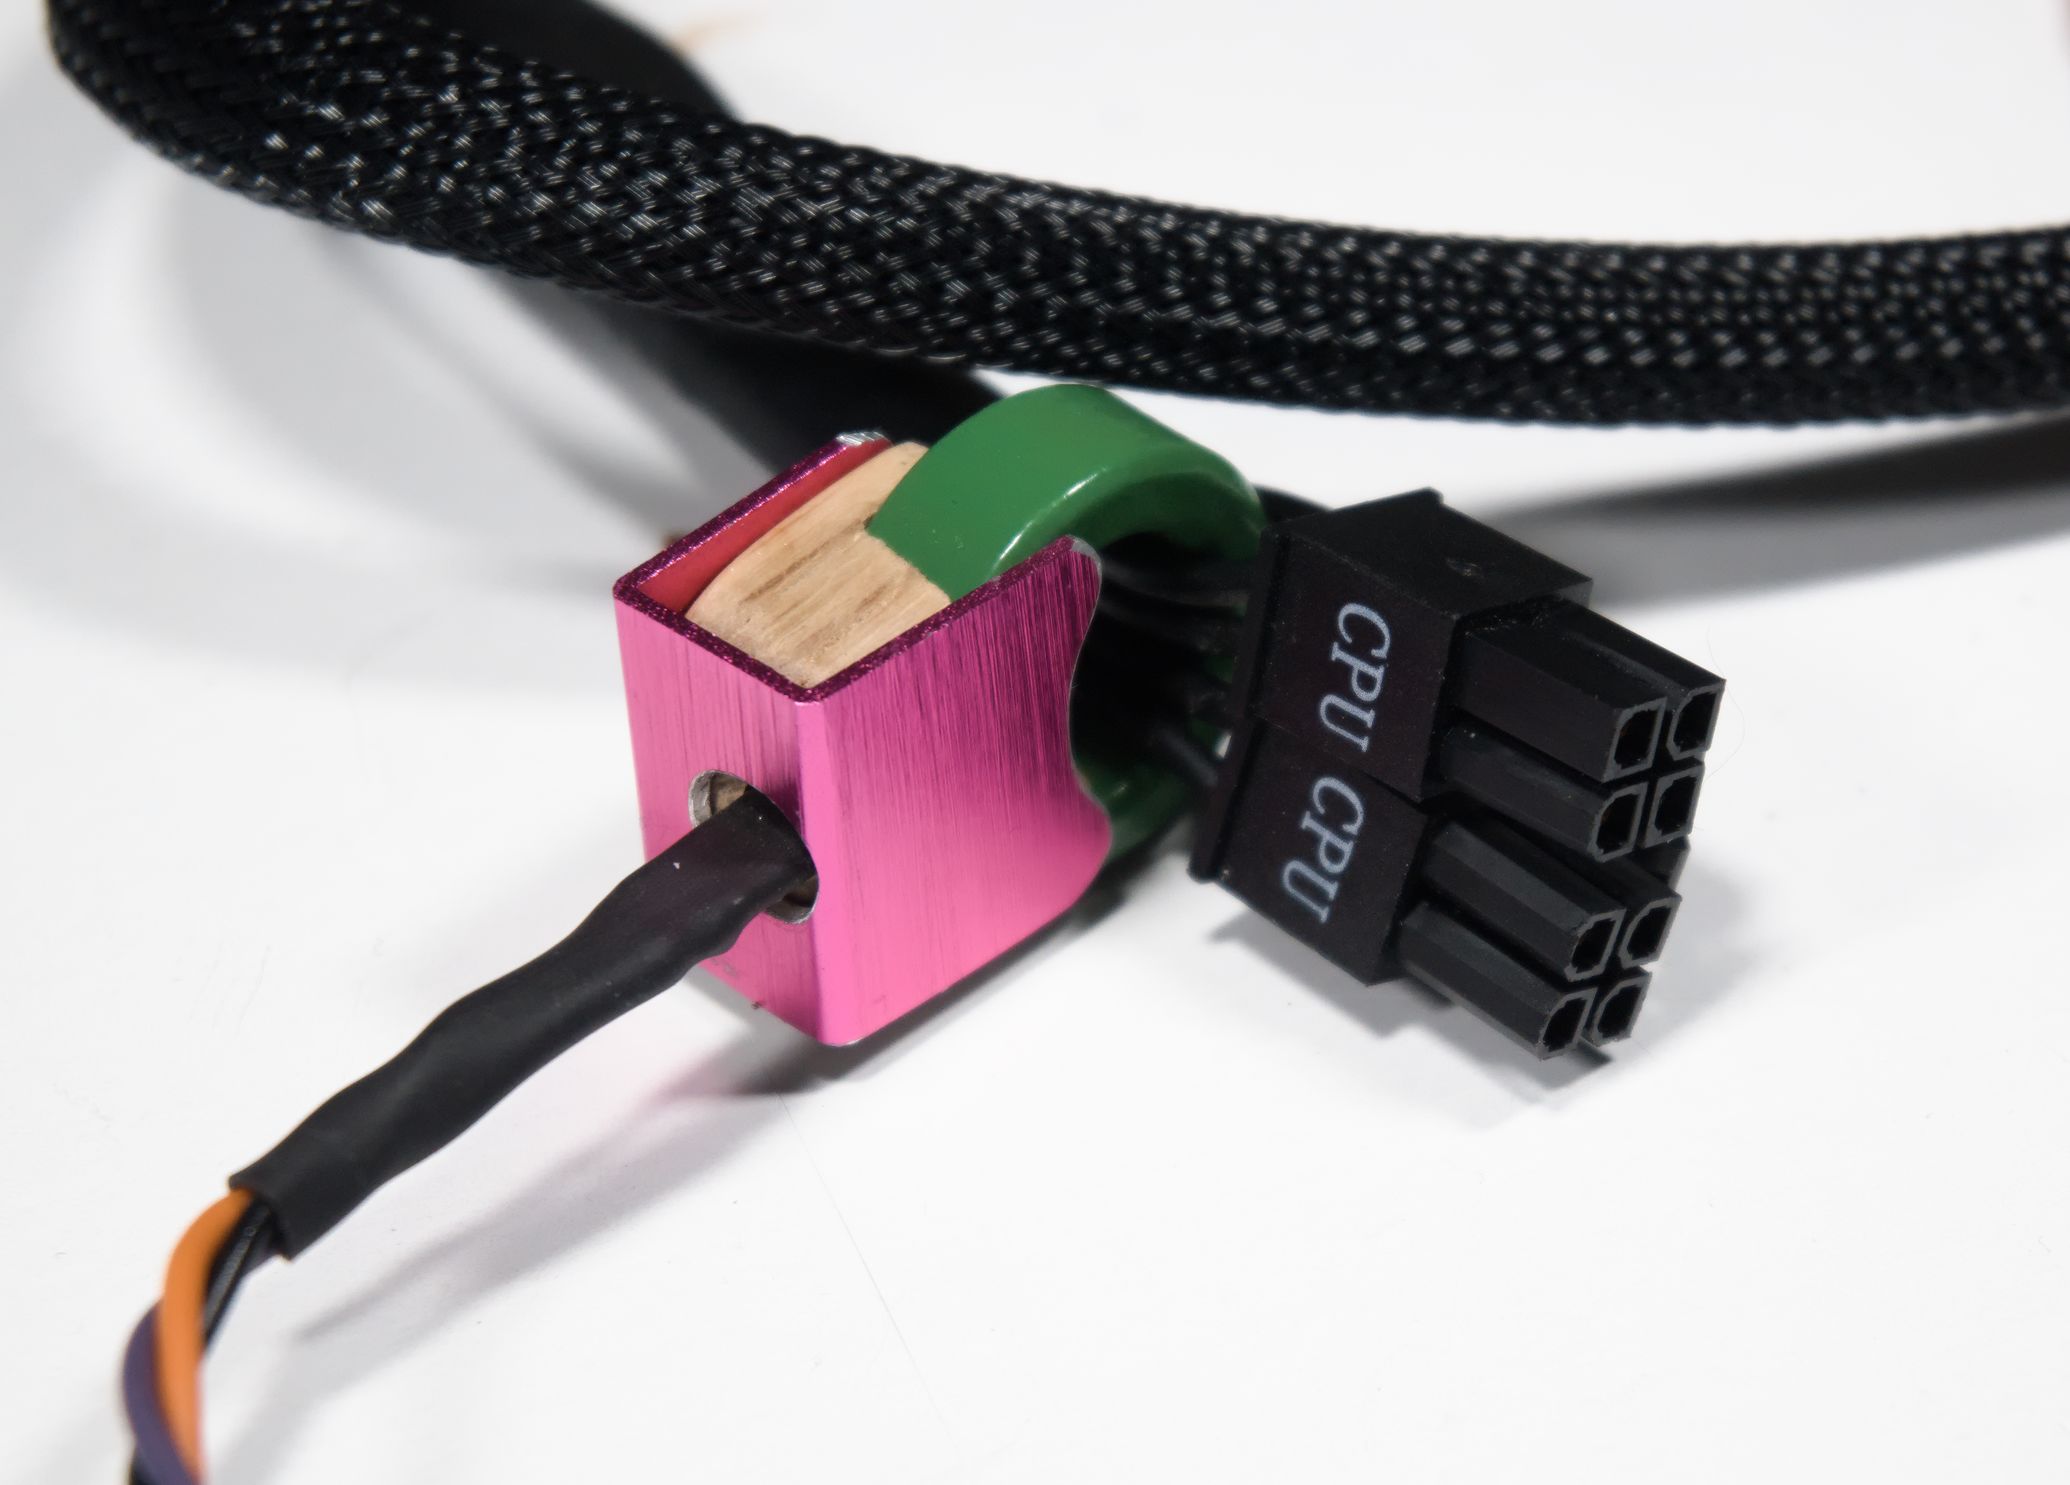 A CPU power cable, with the 12V wires passing through the green toroidal core. The sensor is inserted into the gap in the core, with the wooden and aluminium mounting hardware holding it in place.